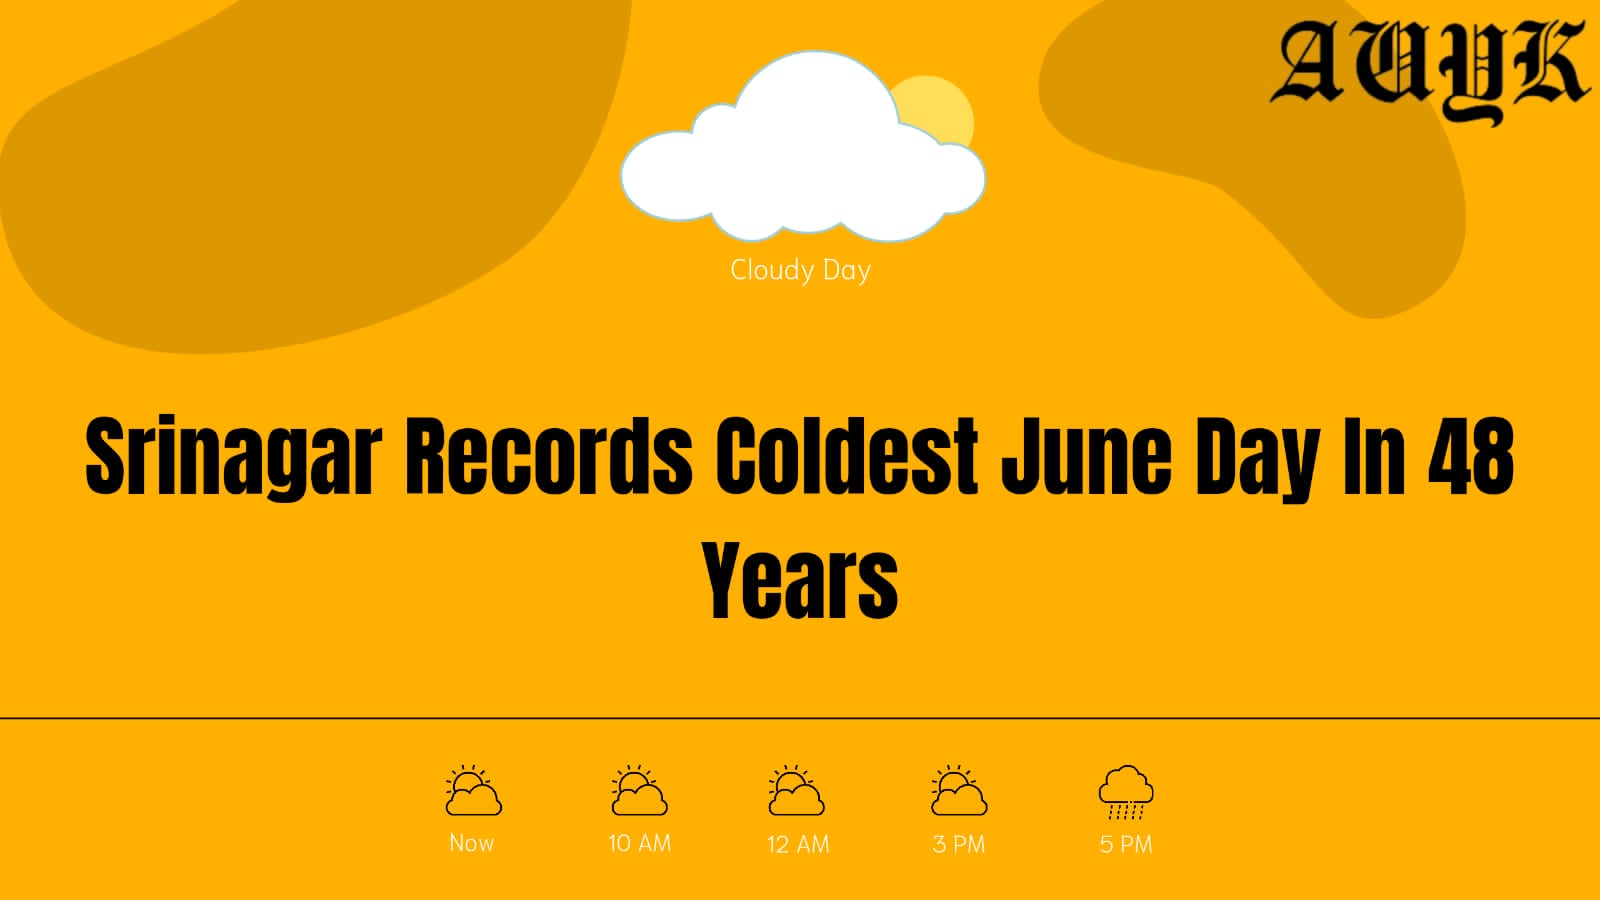 Srinagar Records Coldest June Day In 48 Years